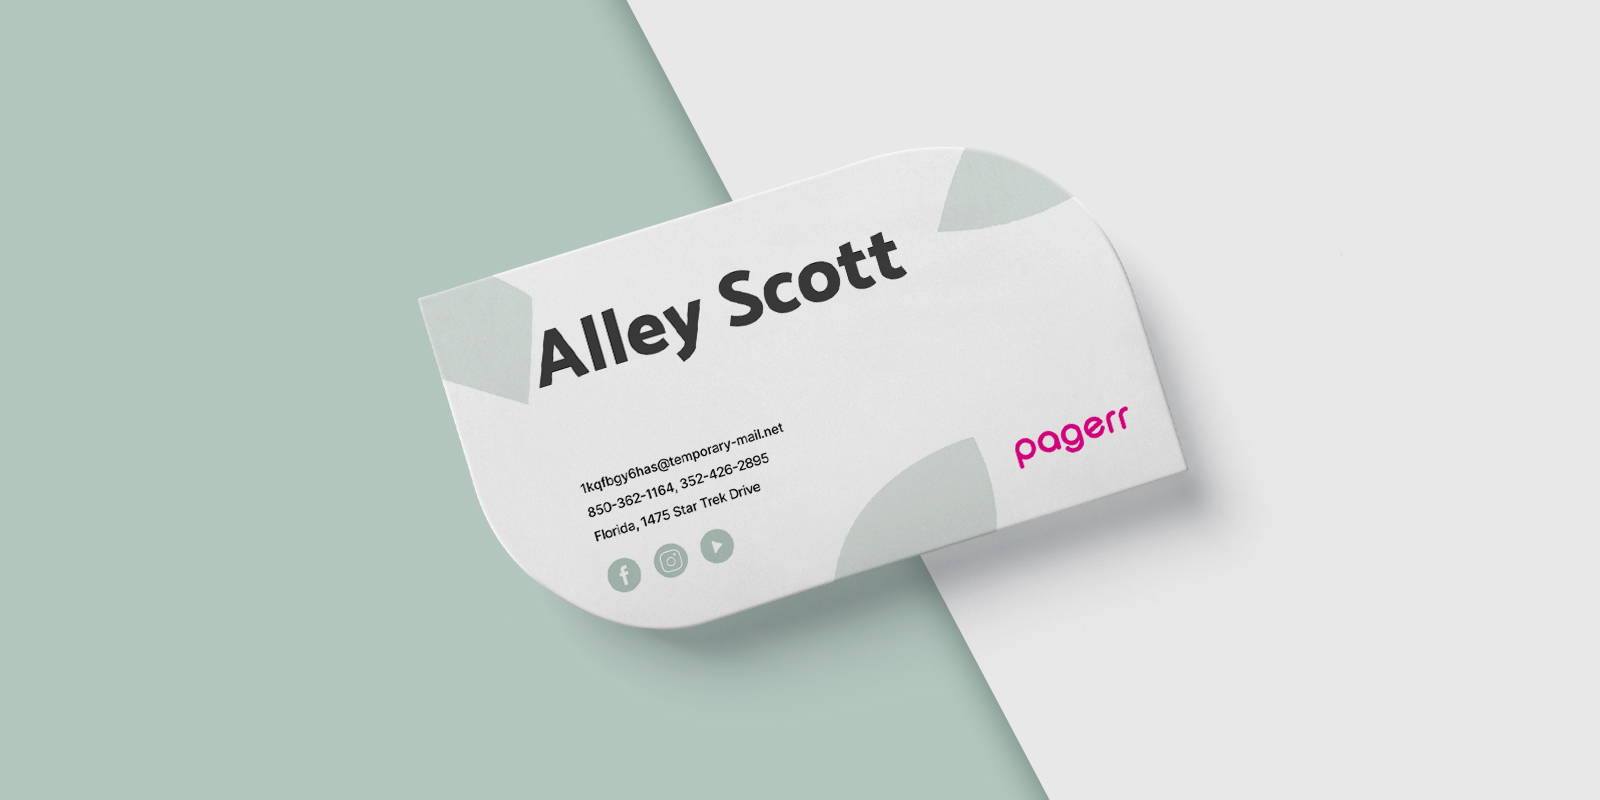 Special shape business cards in Warsaw - Print with Pagerr